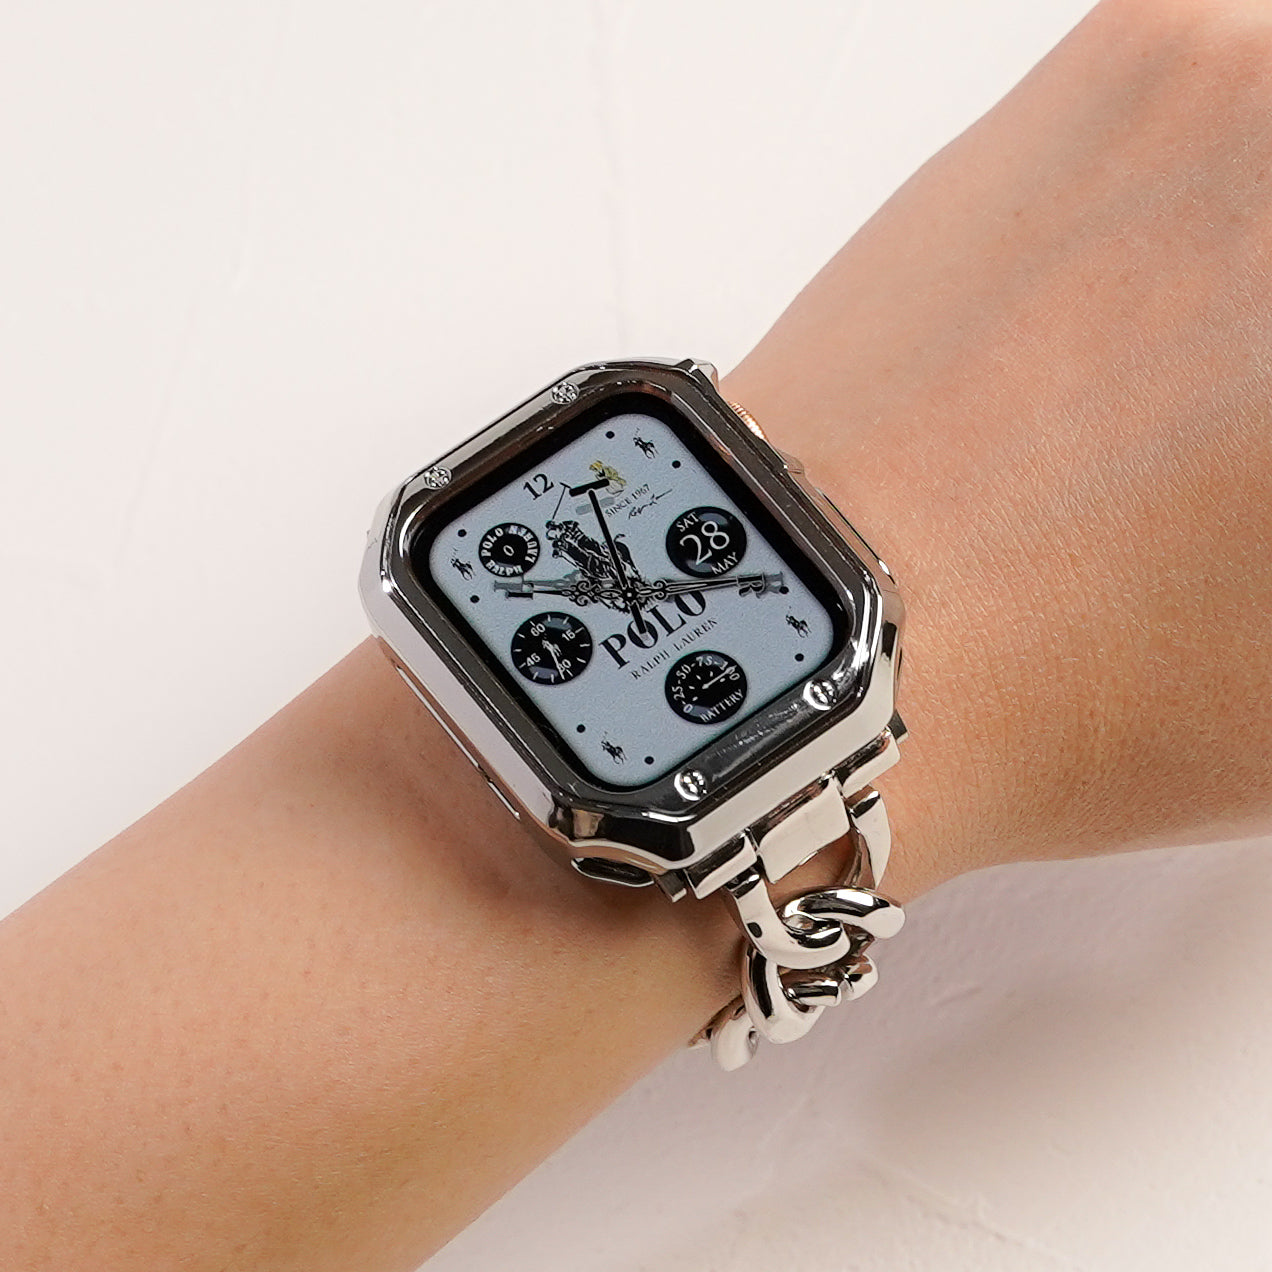 TPU Plated Square Protective Frame Soft Type Apple Watch Half Cover Apple Watch